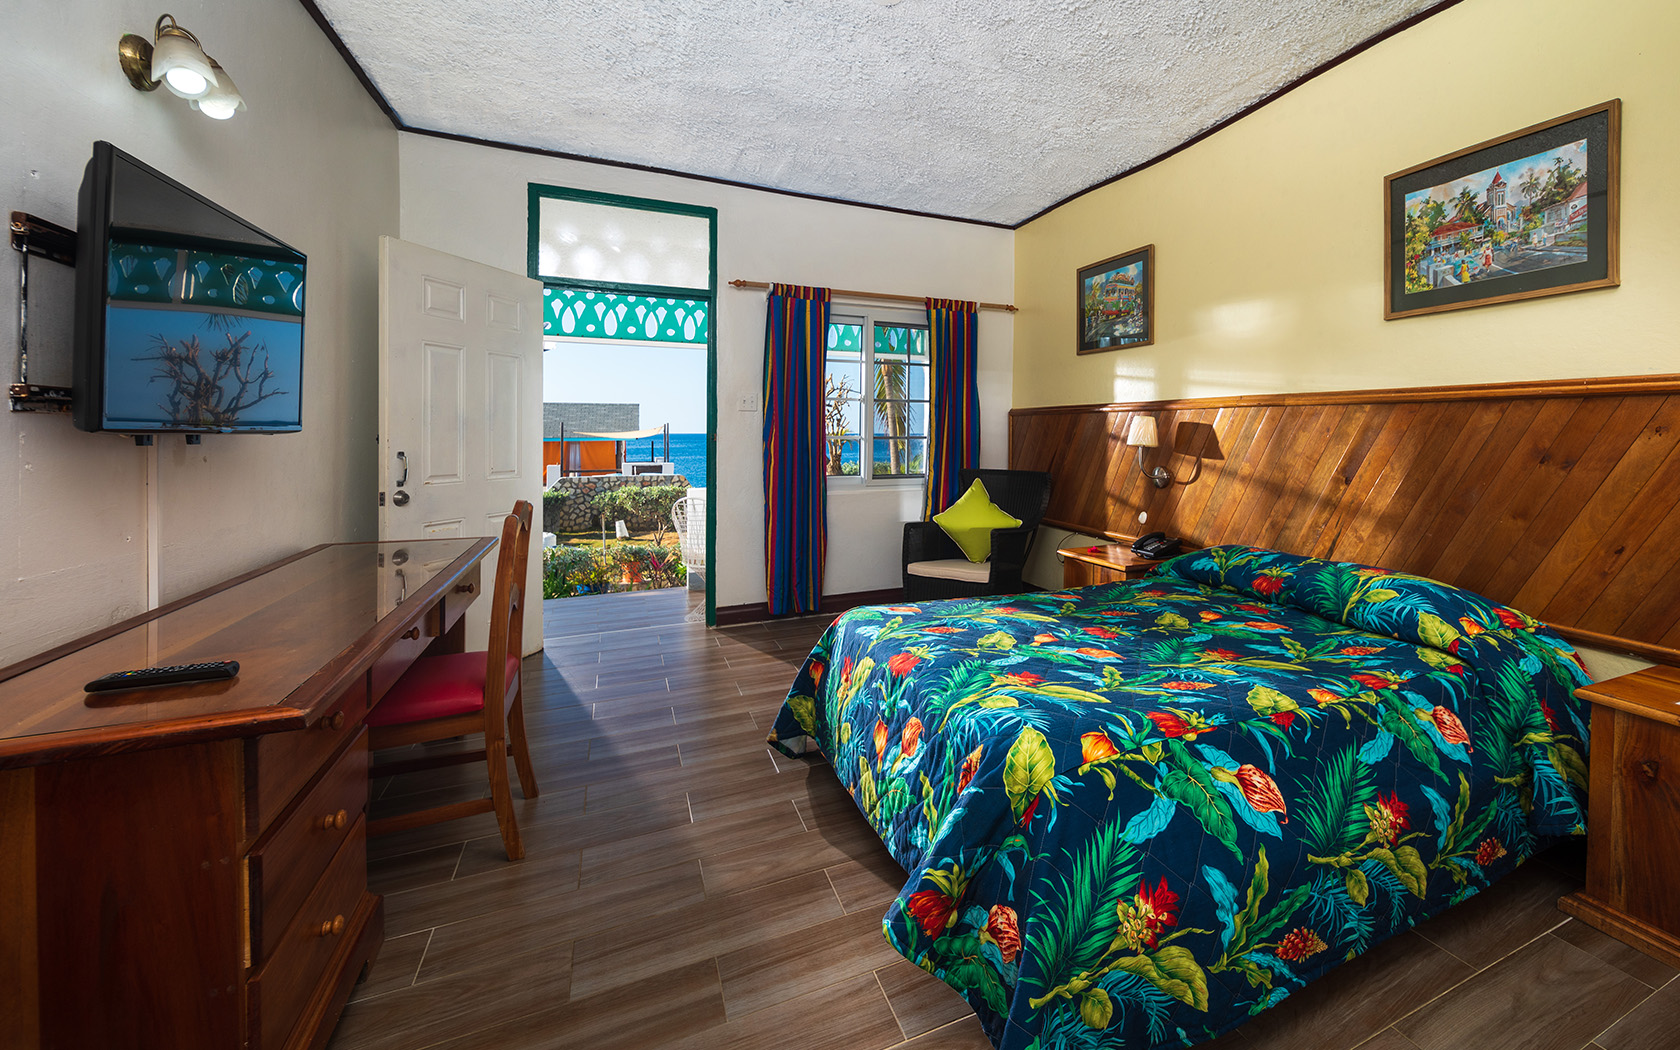 spacious guest room with tropical bedding linen and wooden furniture accents